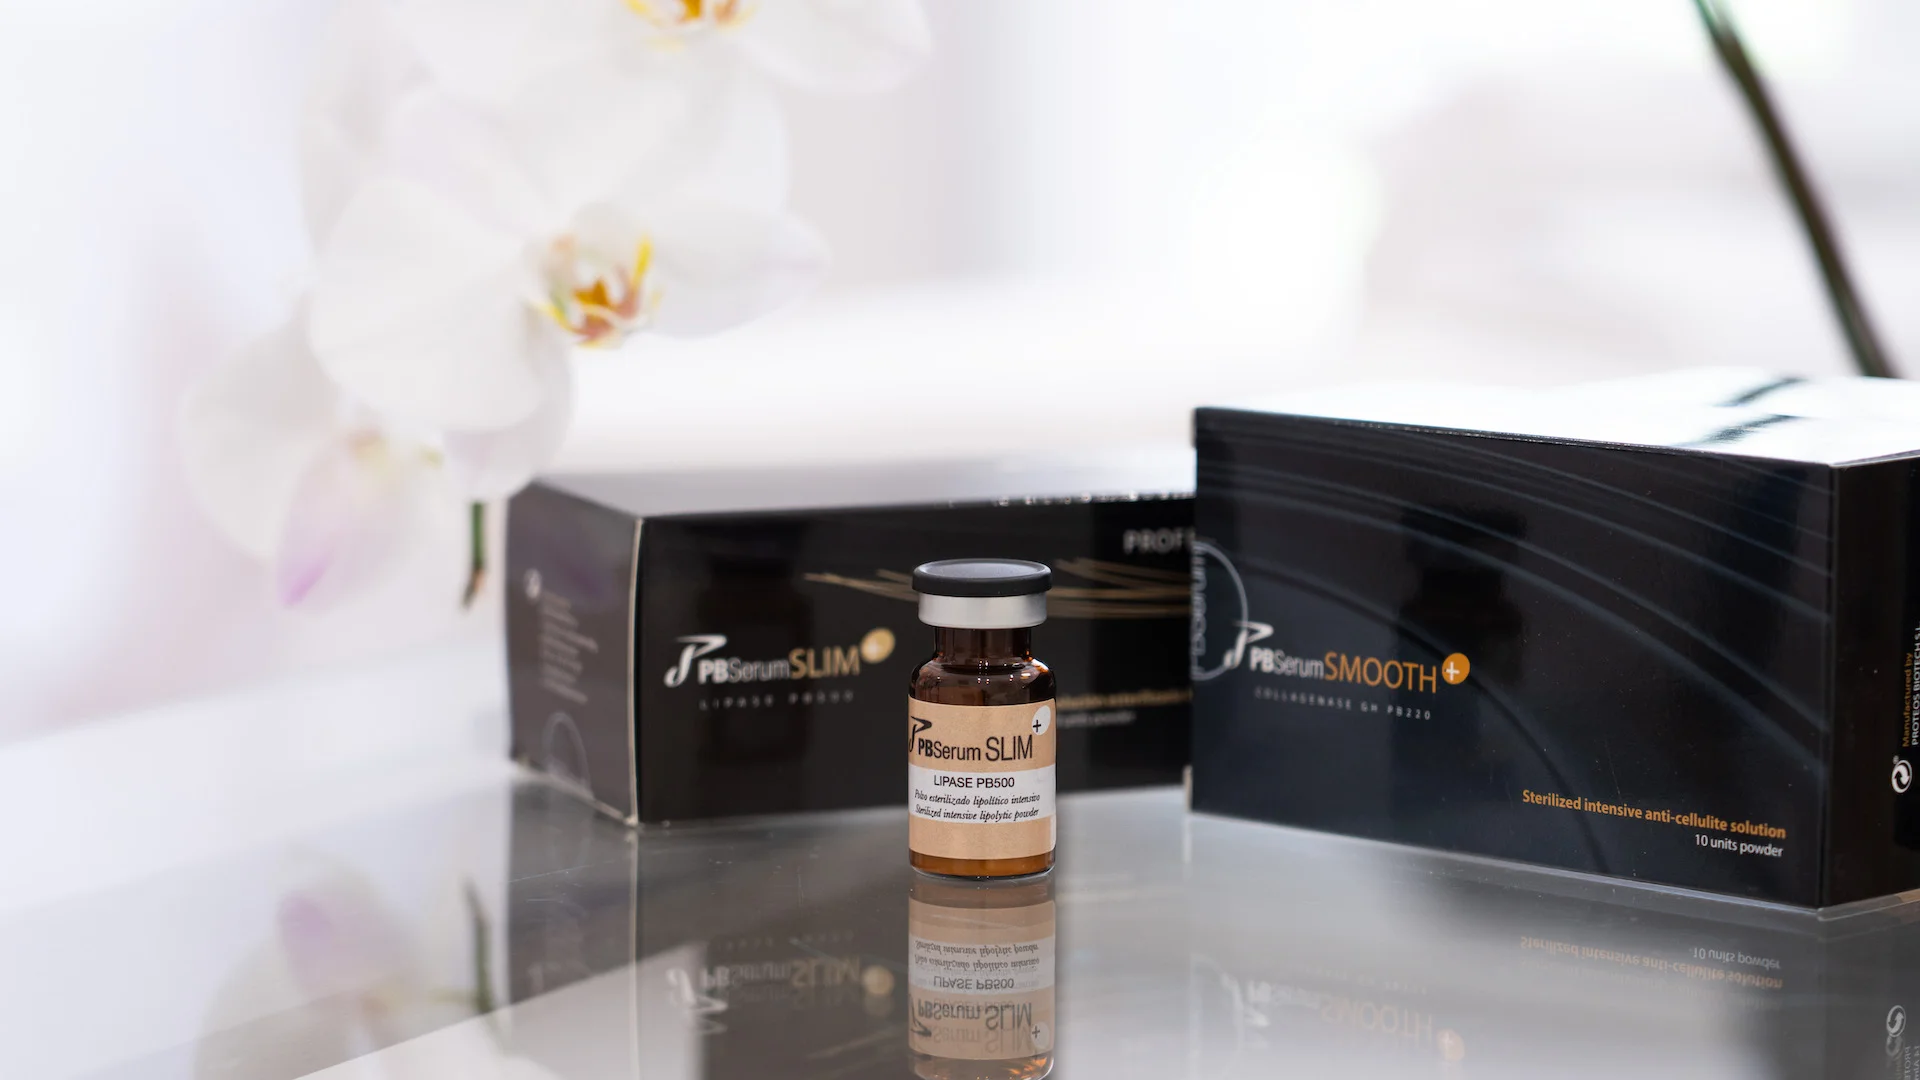 PBSerum enzyme, facial skin regeneration and improvement - achieve supreme and long-lasting results in skin improvements after one injectable treatment session.